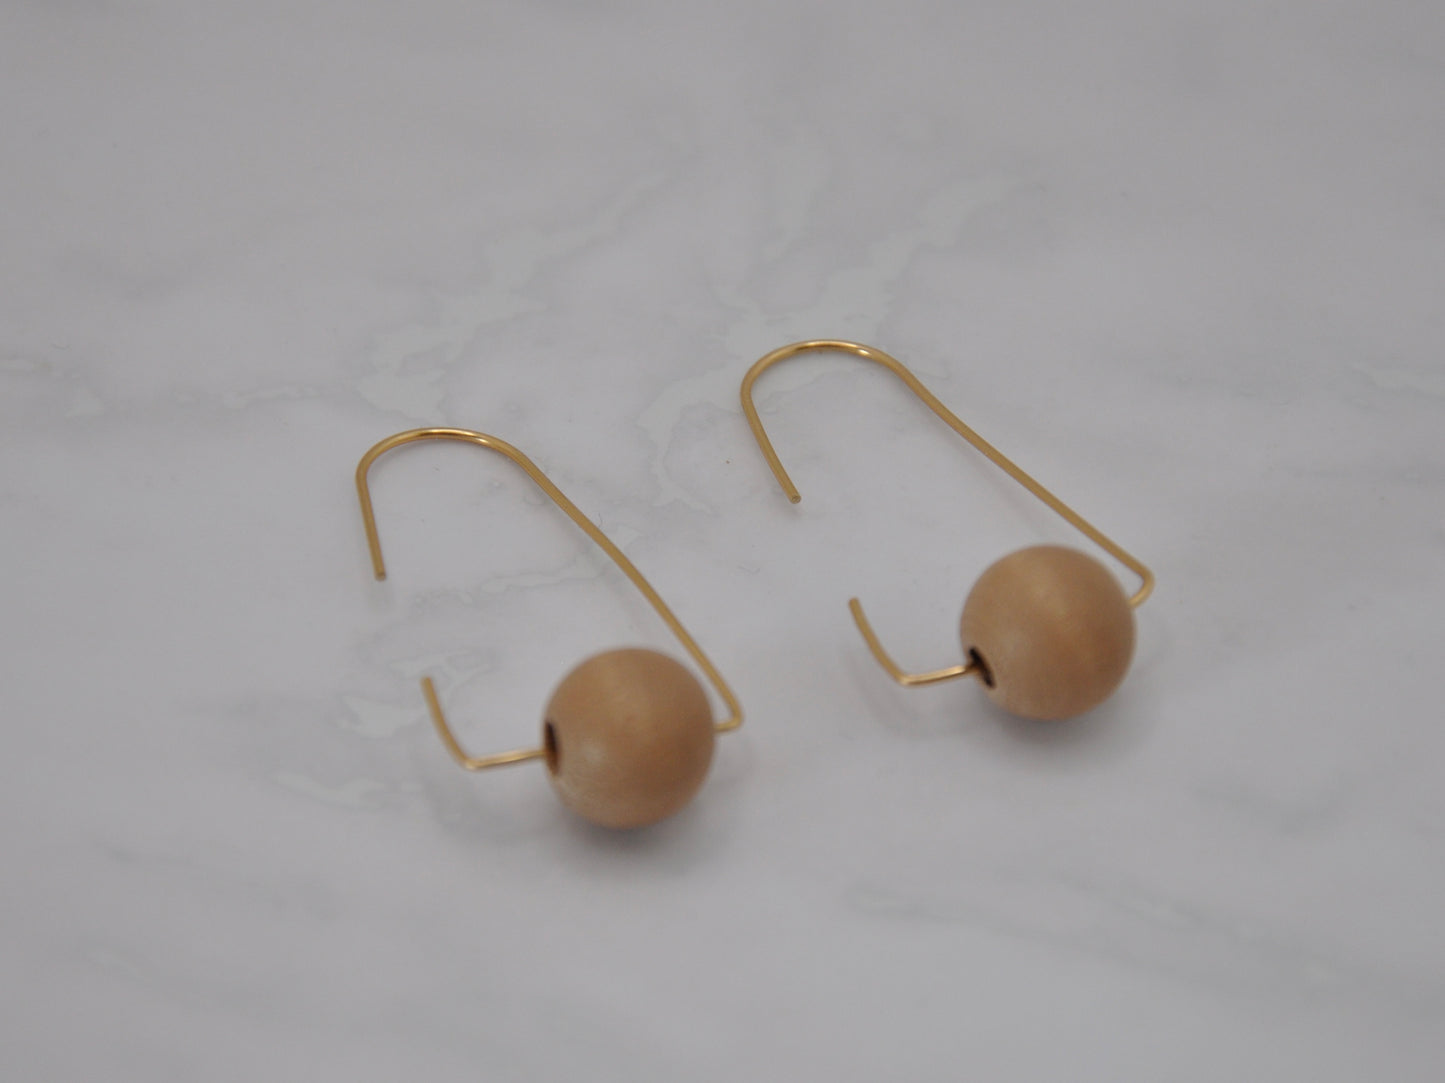 Wire and Wood Bead Earrings